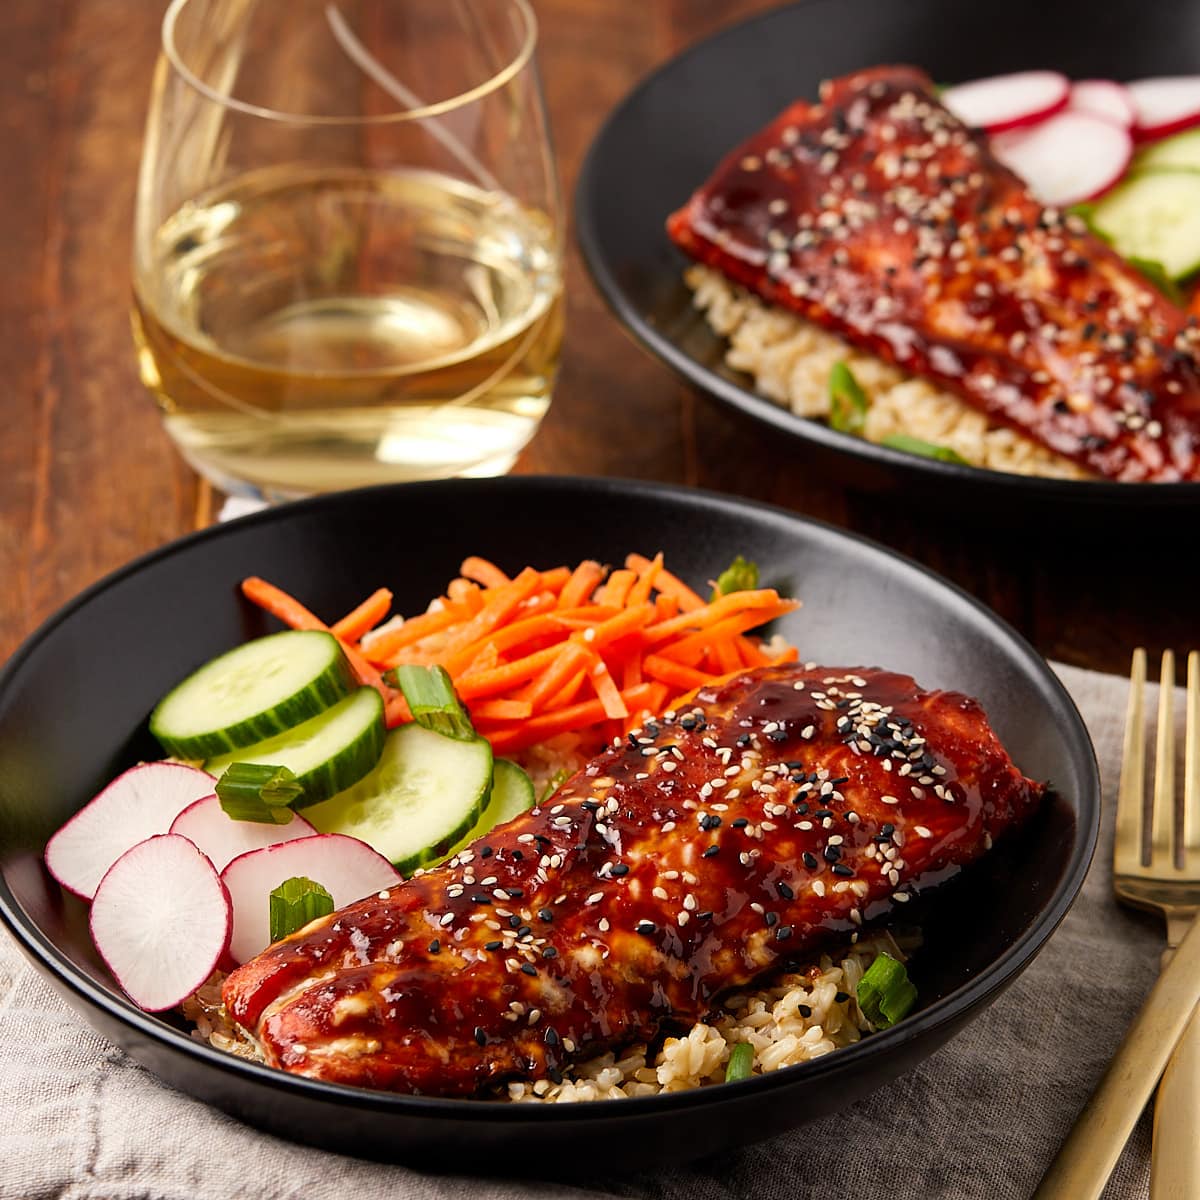 teriyaki salmon bowls in a black bowl served with white wine.